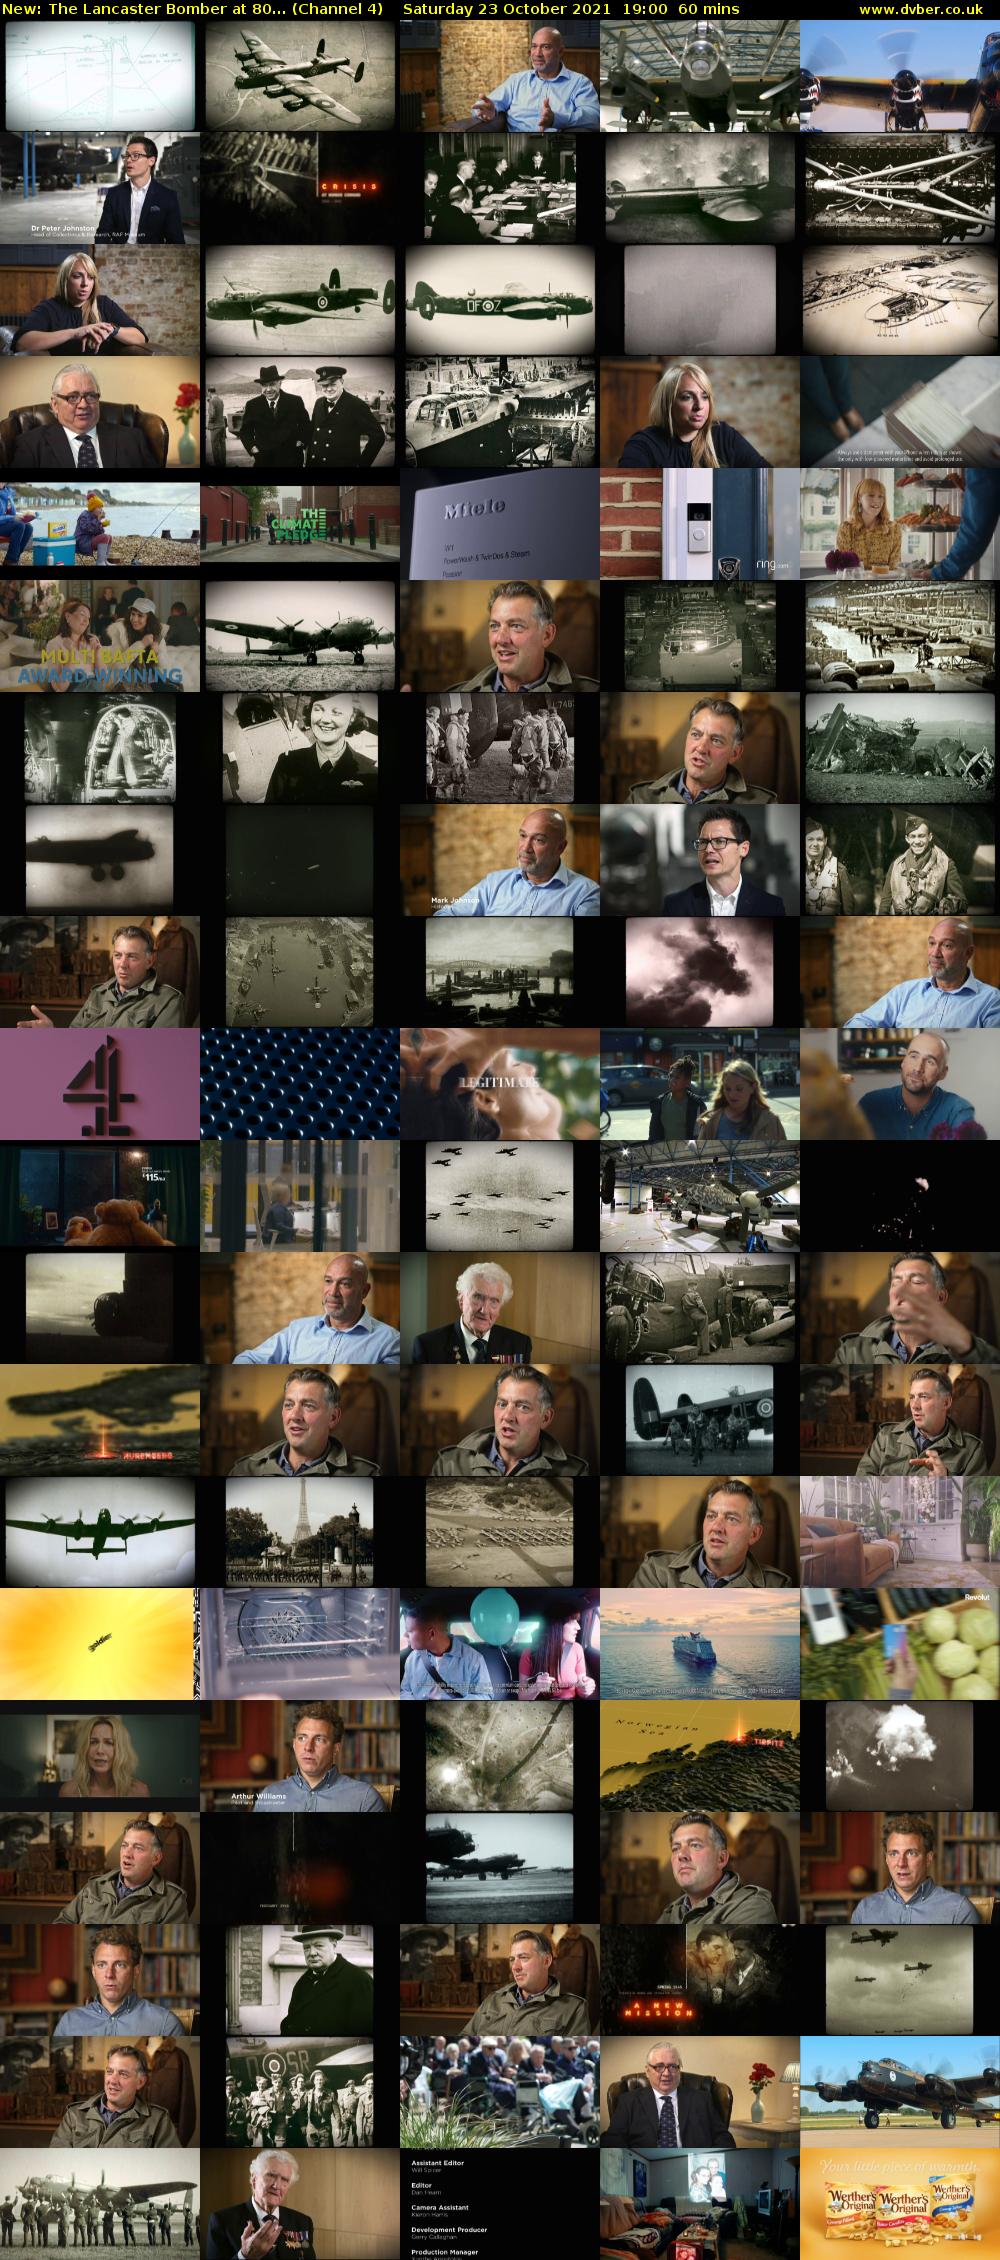 The Lancaster Bomber at 80... (Channel 4) Saturday 23 October 2021 19:00 - 20:00